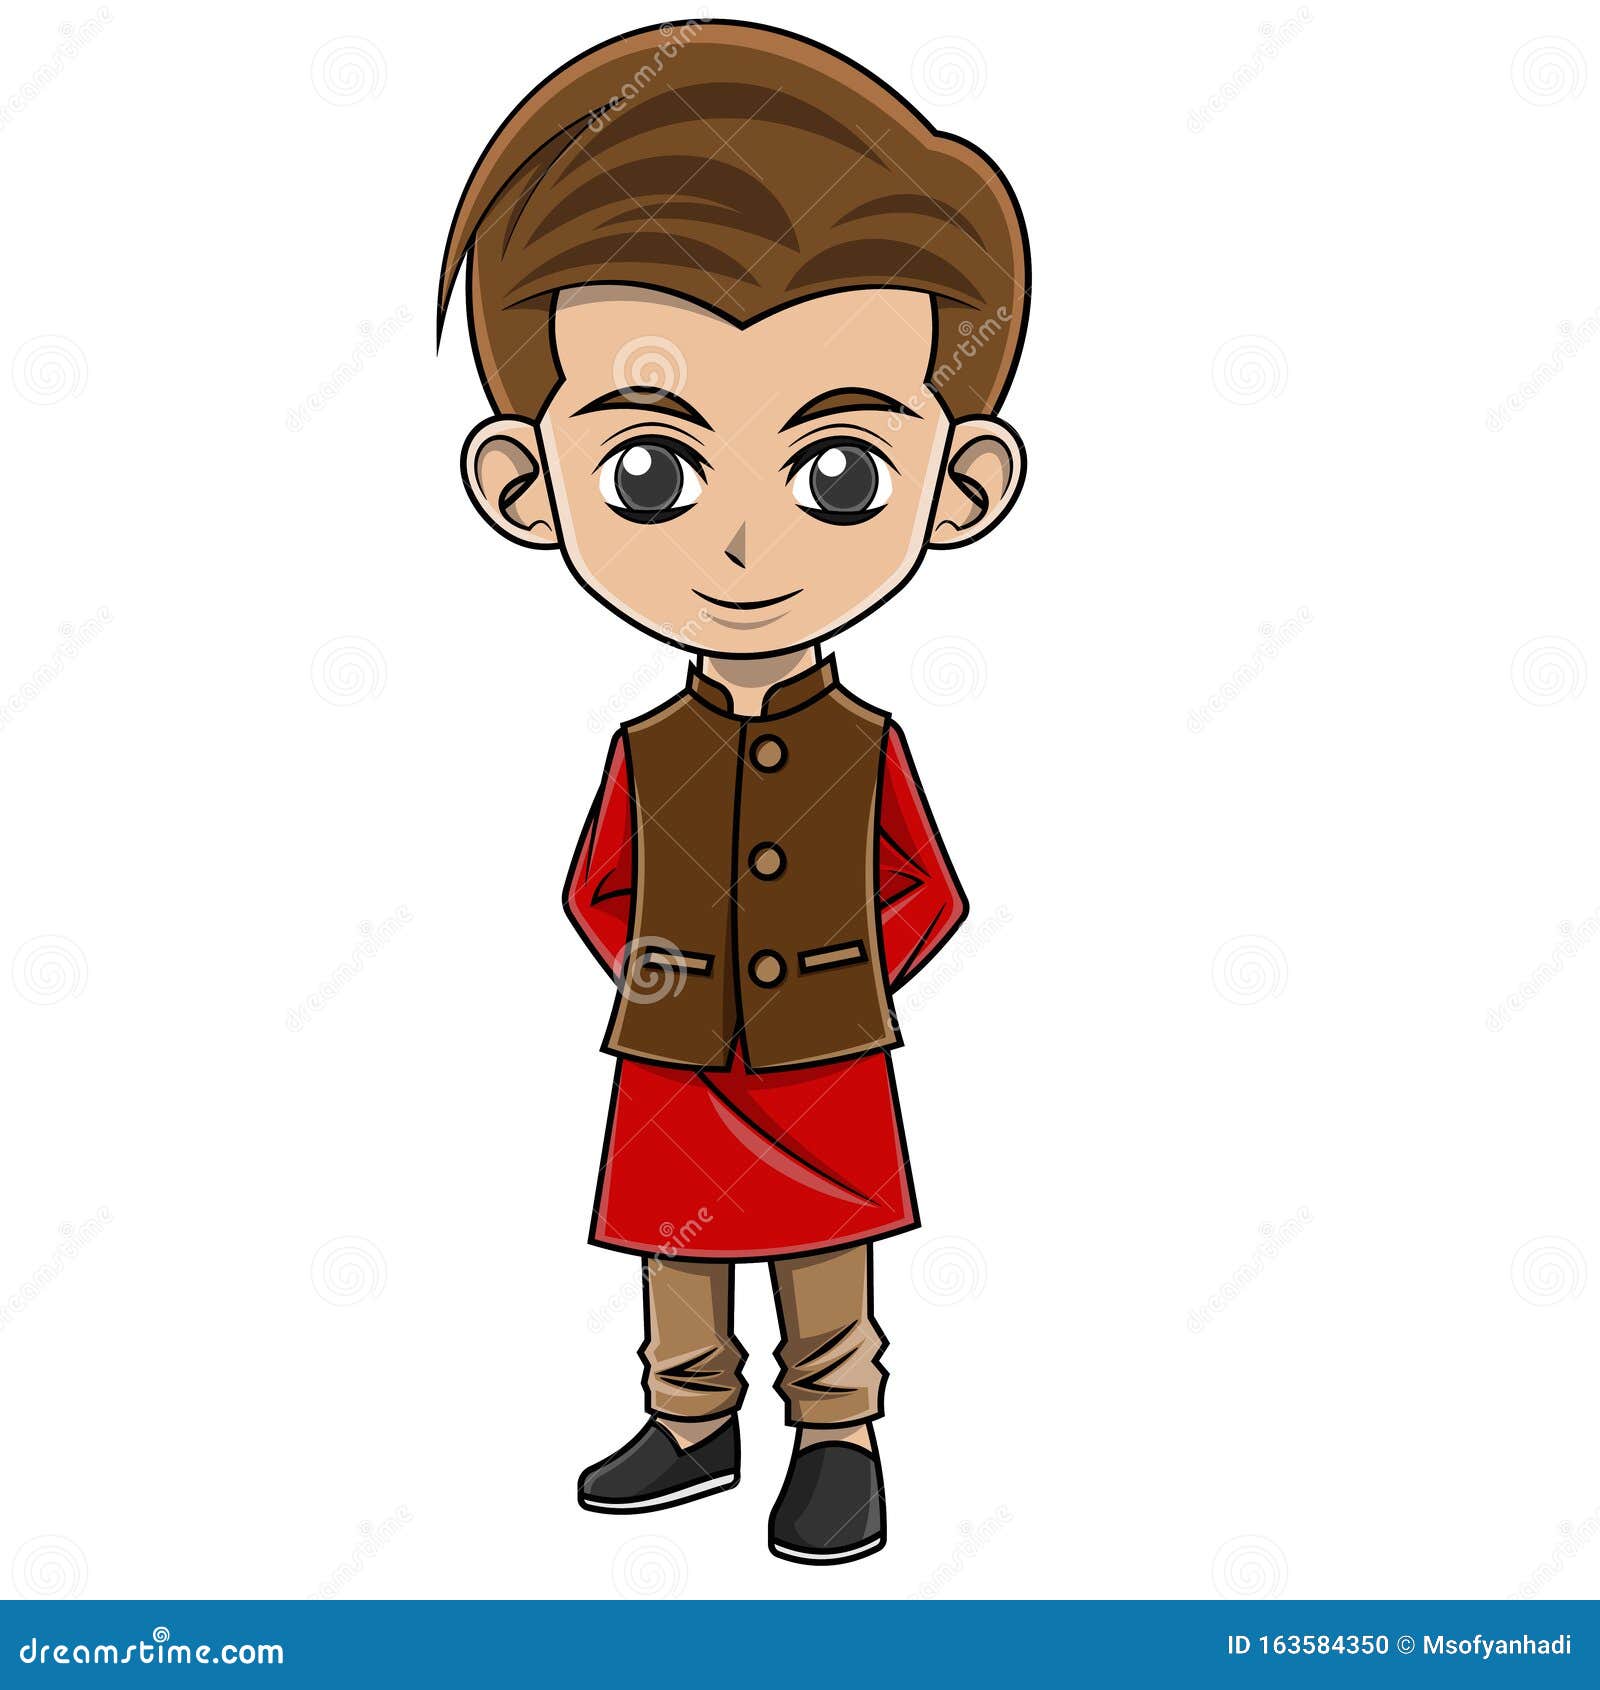 Cartoon Boy Wearing Indian Clothes Stock Vector - Illustration of muslim,  religion: 163584350